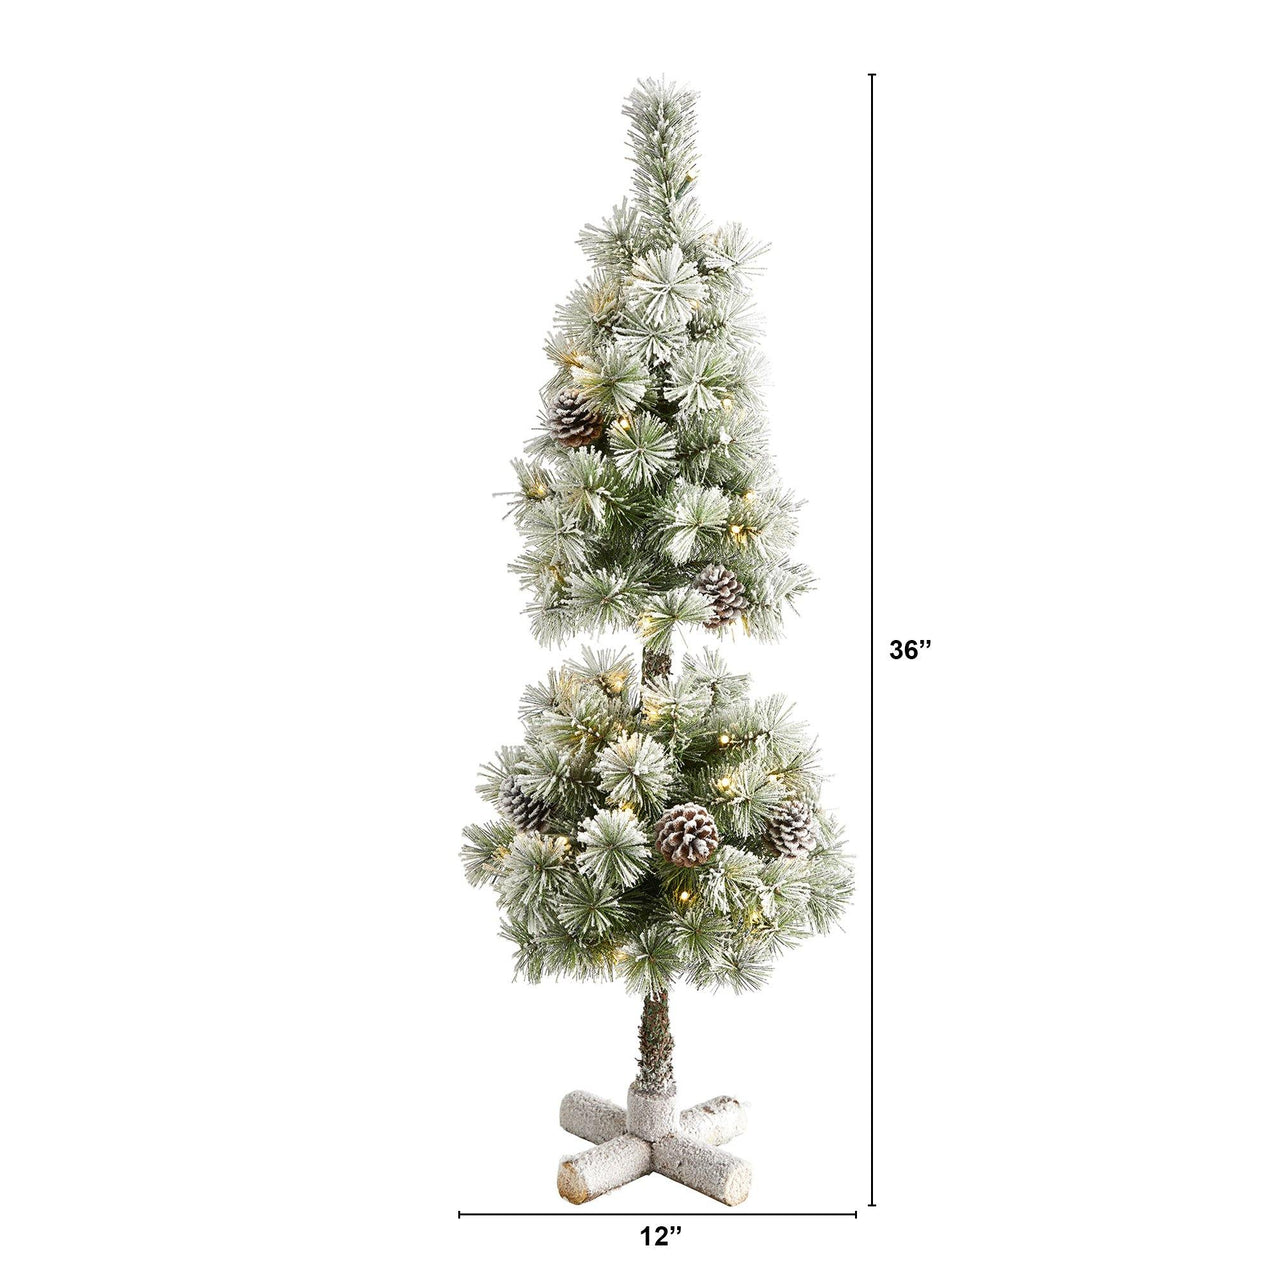 3’ Flocked Artificial Christmas Tree Topiary with 50 Warm White LED Lights and Pine Cones - The Fox Decor